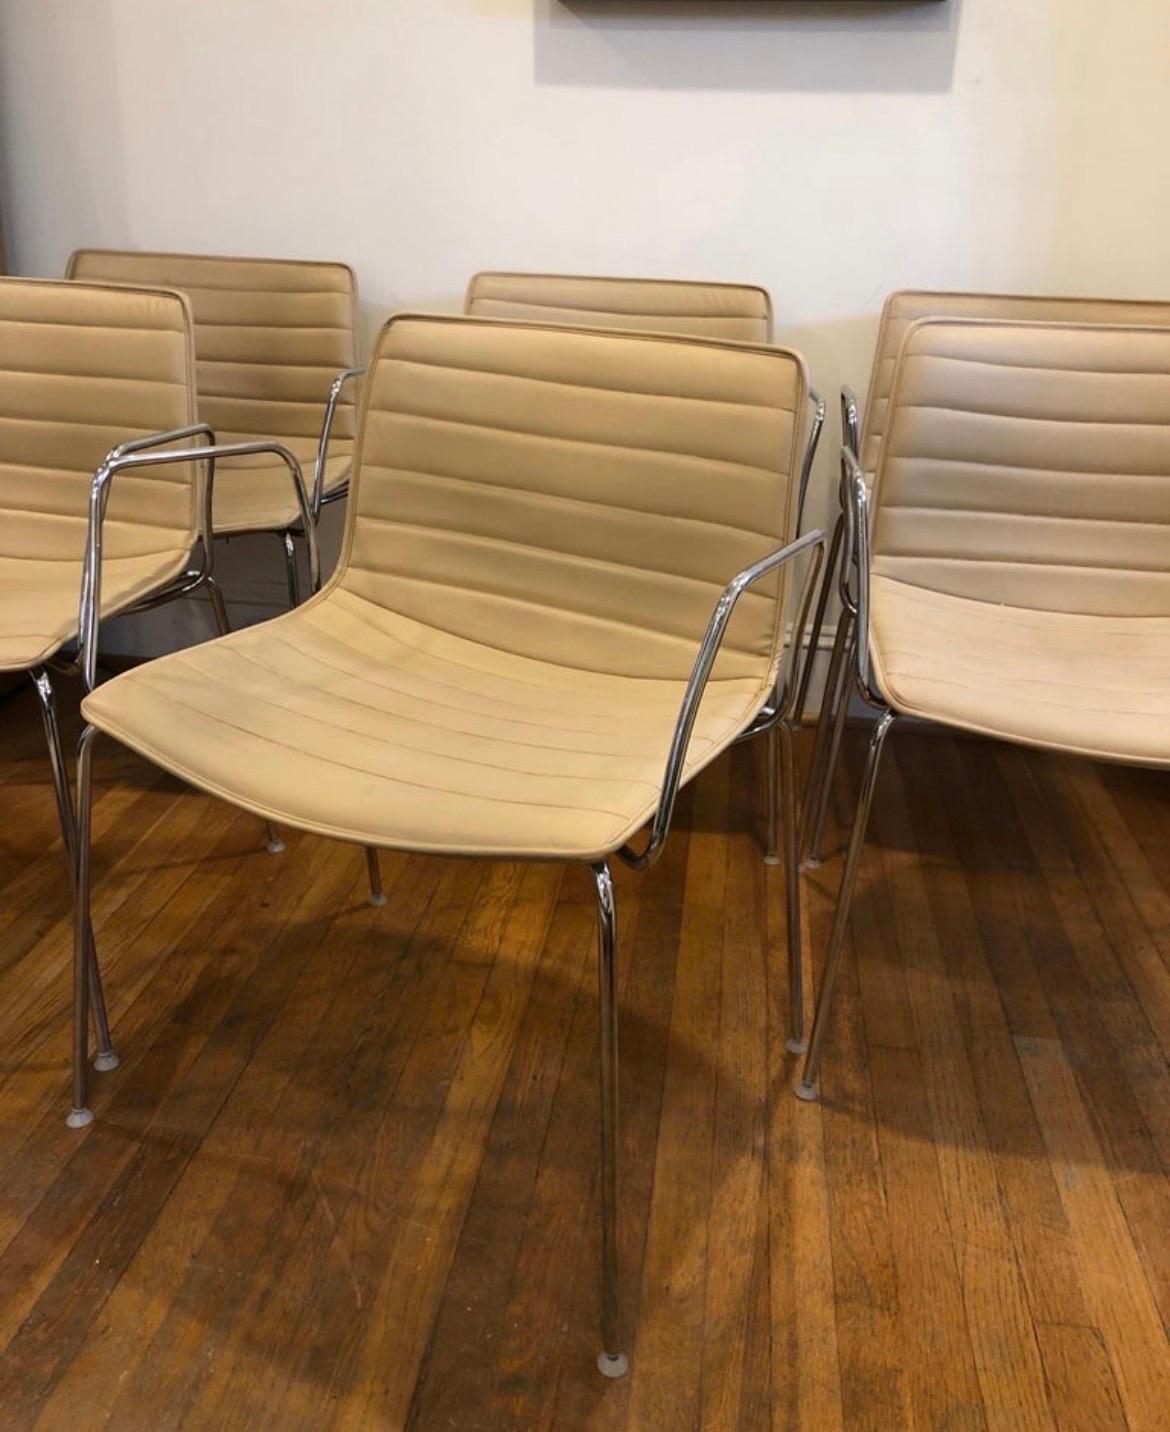 Modern Arper Catifa 53 Chairs - Tan Leather with Steel Base and Arms - 10 Available For Sale